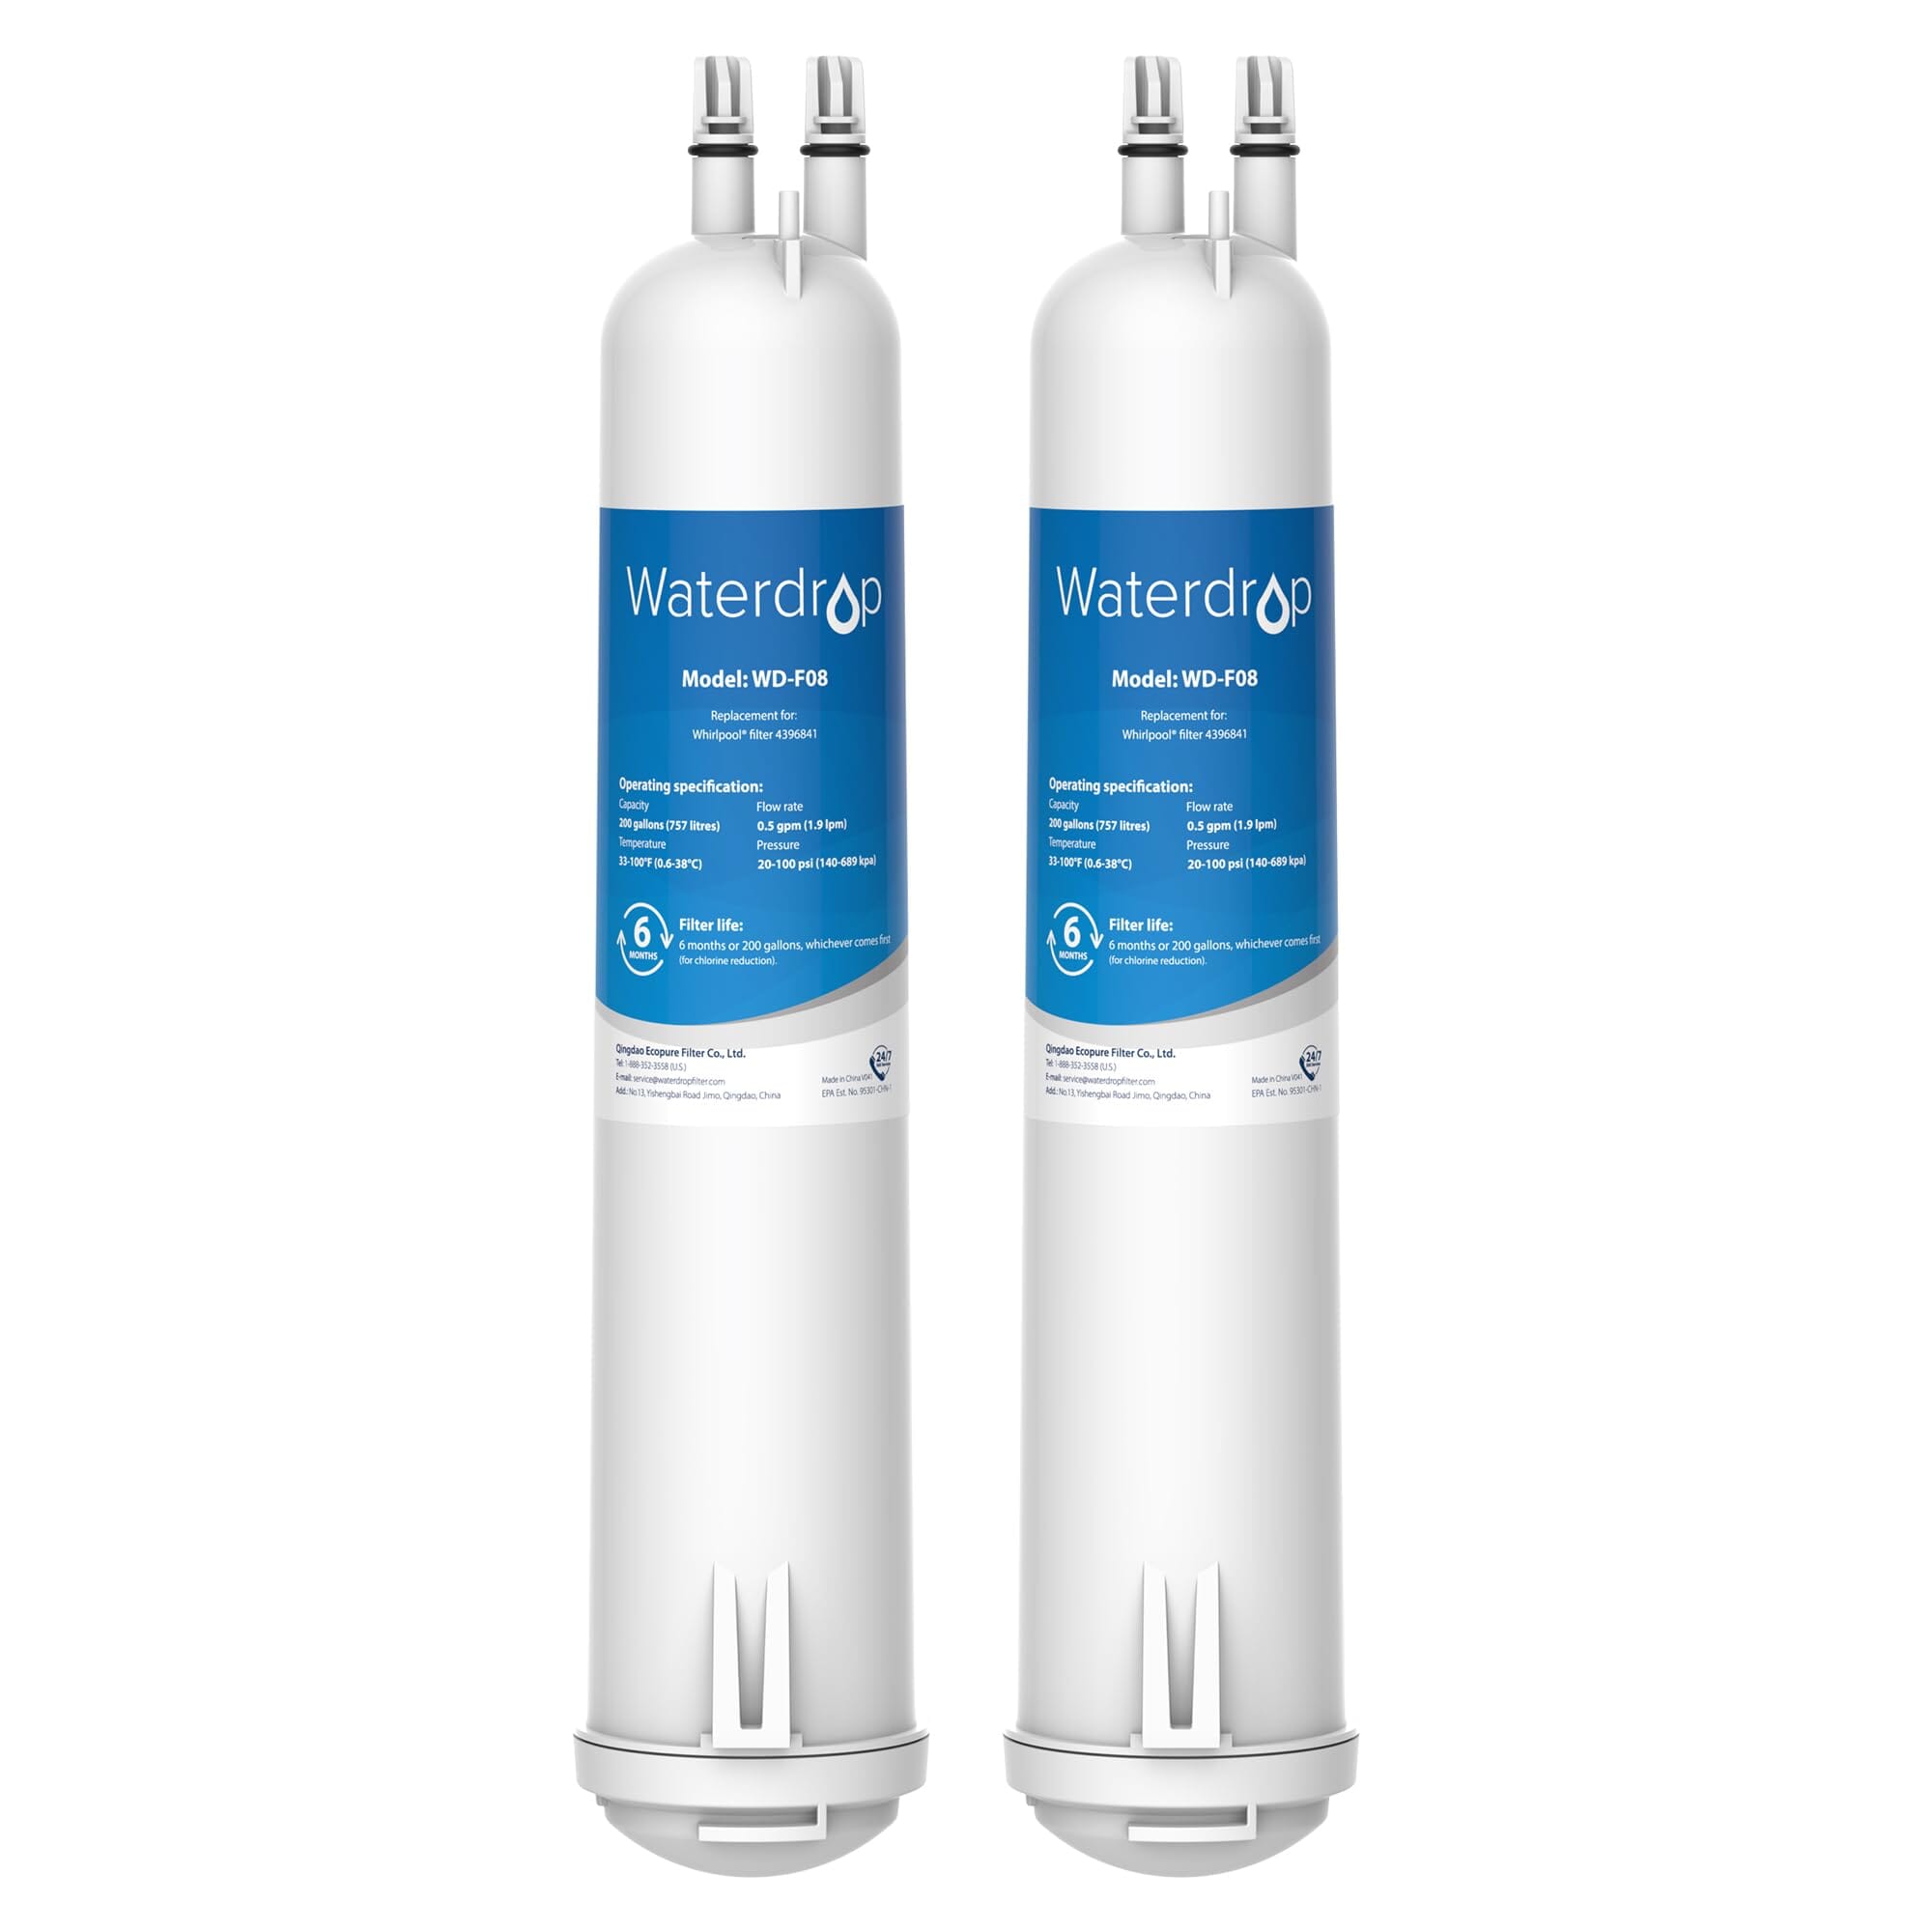 Waterdrop WDP-F07-3 Refrigerator Water Filter, Replacement for